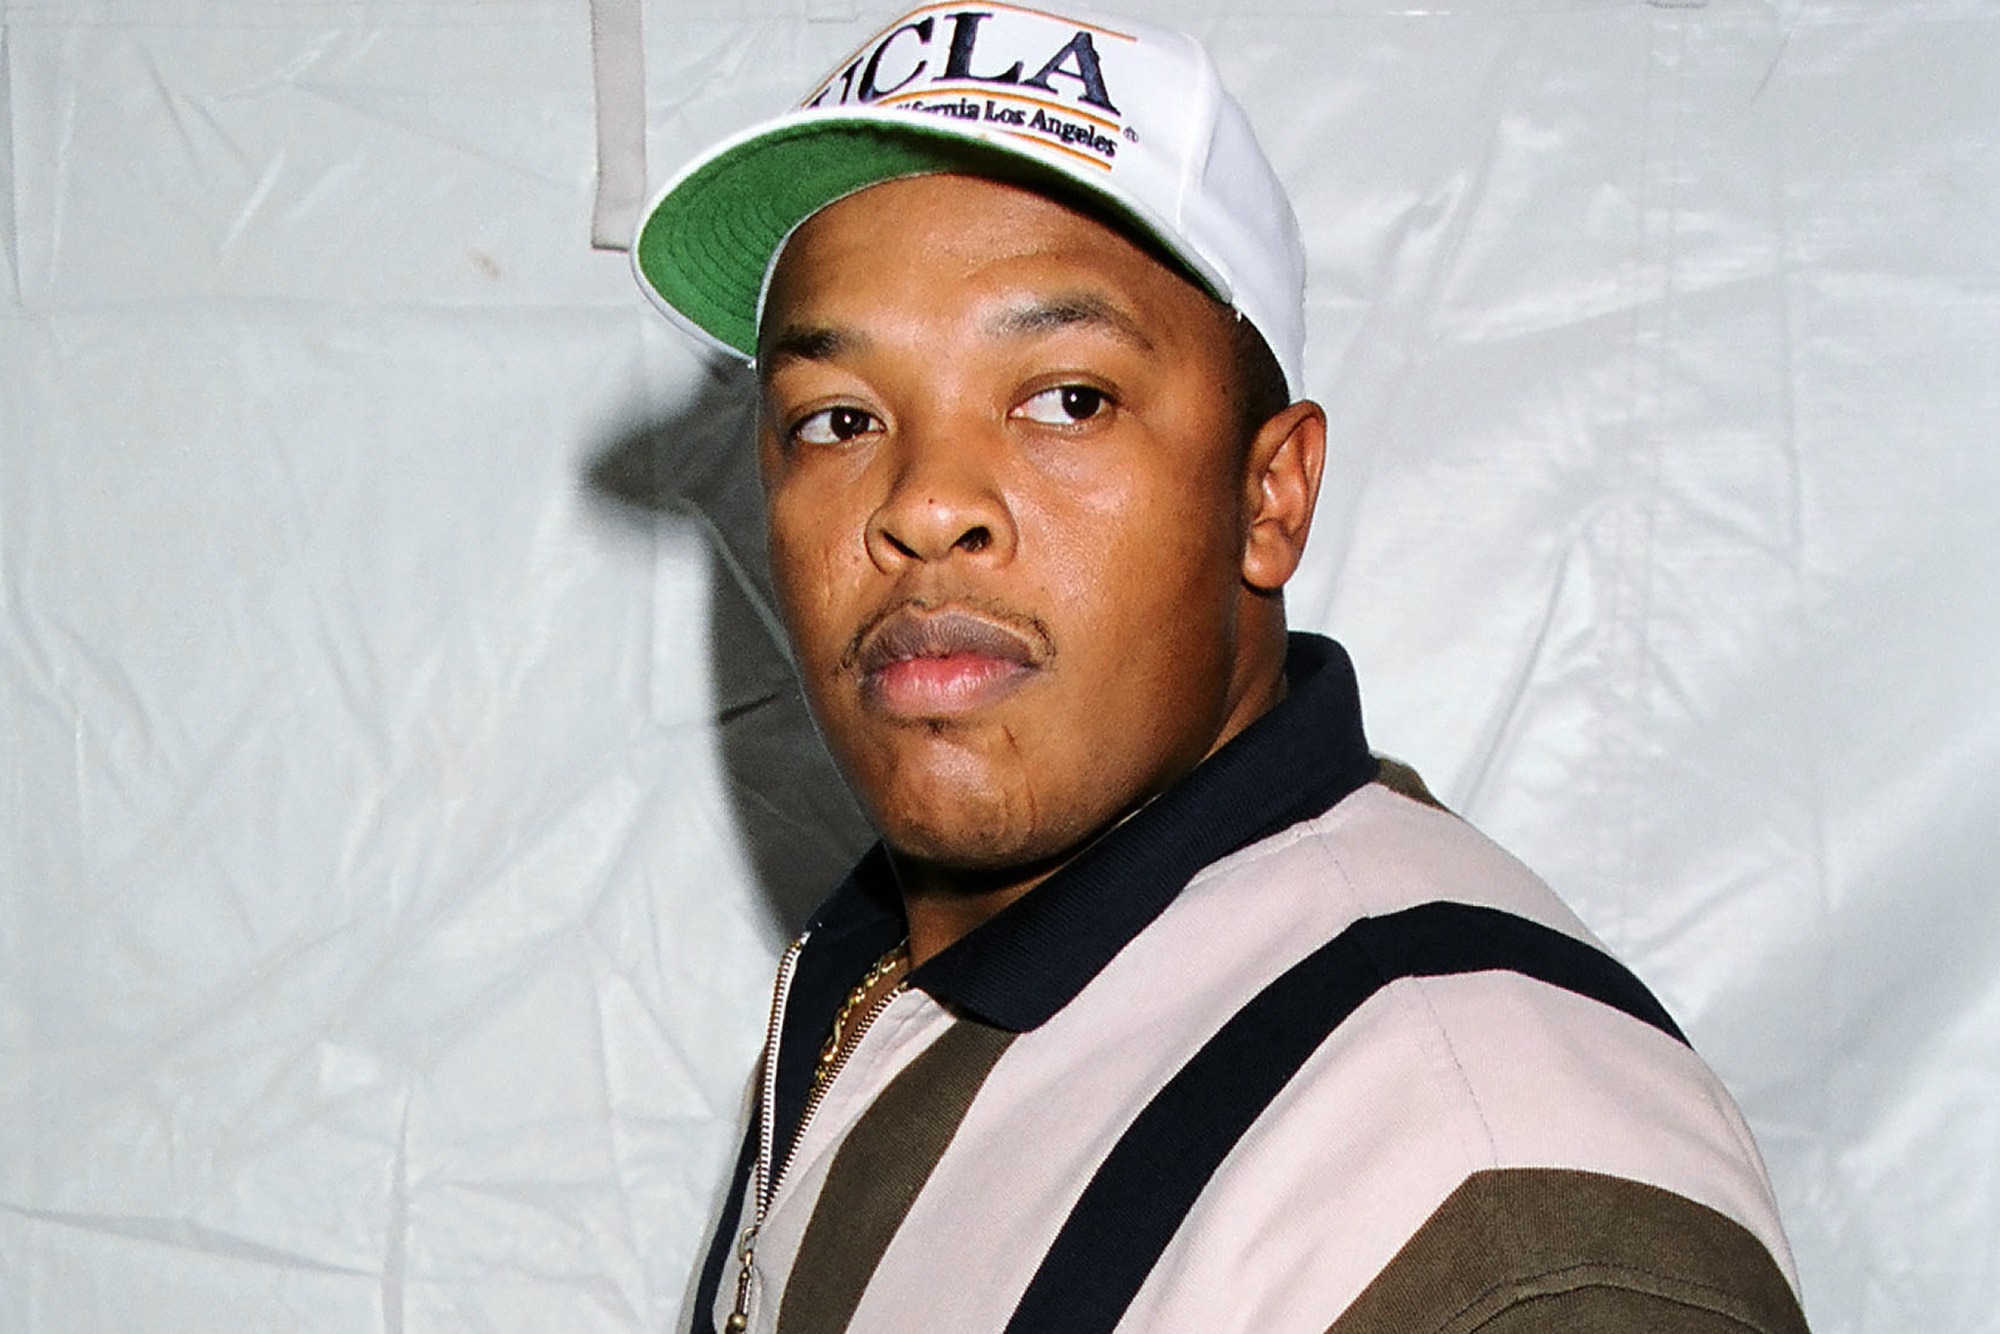 Dr. Dre 'The Chronic' Inducted to Library of Congress National Recording Registry NWA Niggas With Attitude Eminem Snoop Dogg West Coast HipHop Classic Iconic HYPEBEAST Beats By Dre Listen Stream Watch